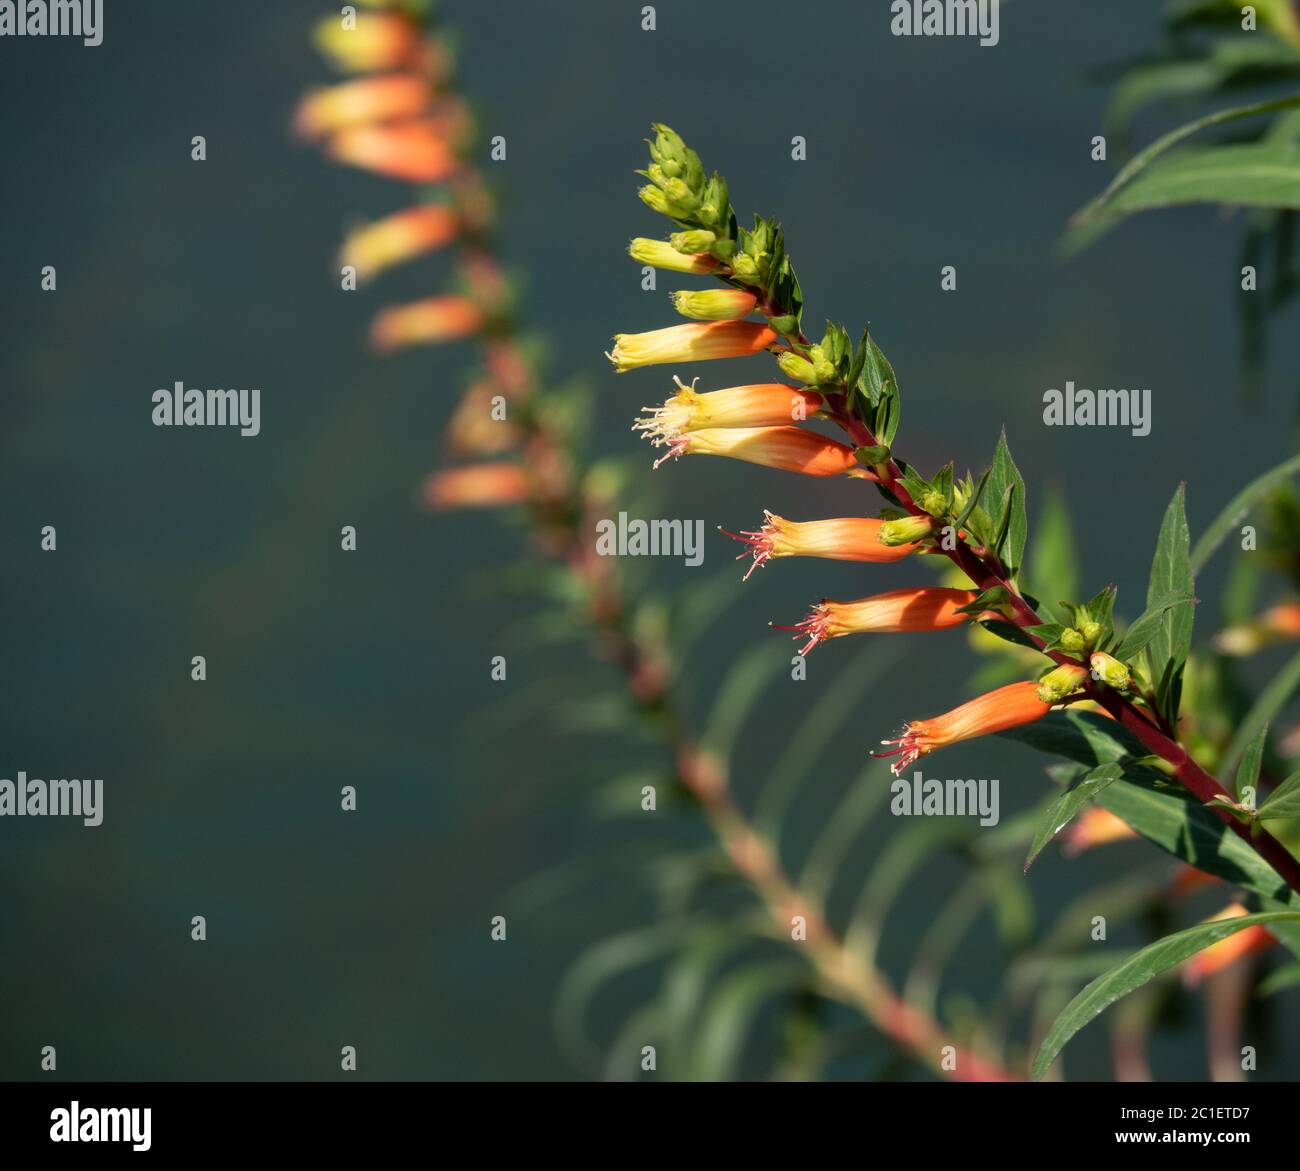 Lovely small tubular flowers; Cuphea Micropetala or Candy Corn Plant flowers. Small evergreen shrub with two-toned color flowers, orange to yellow. Stock Photo